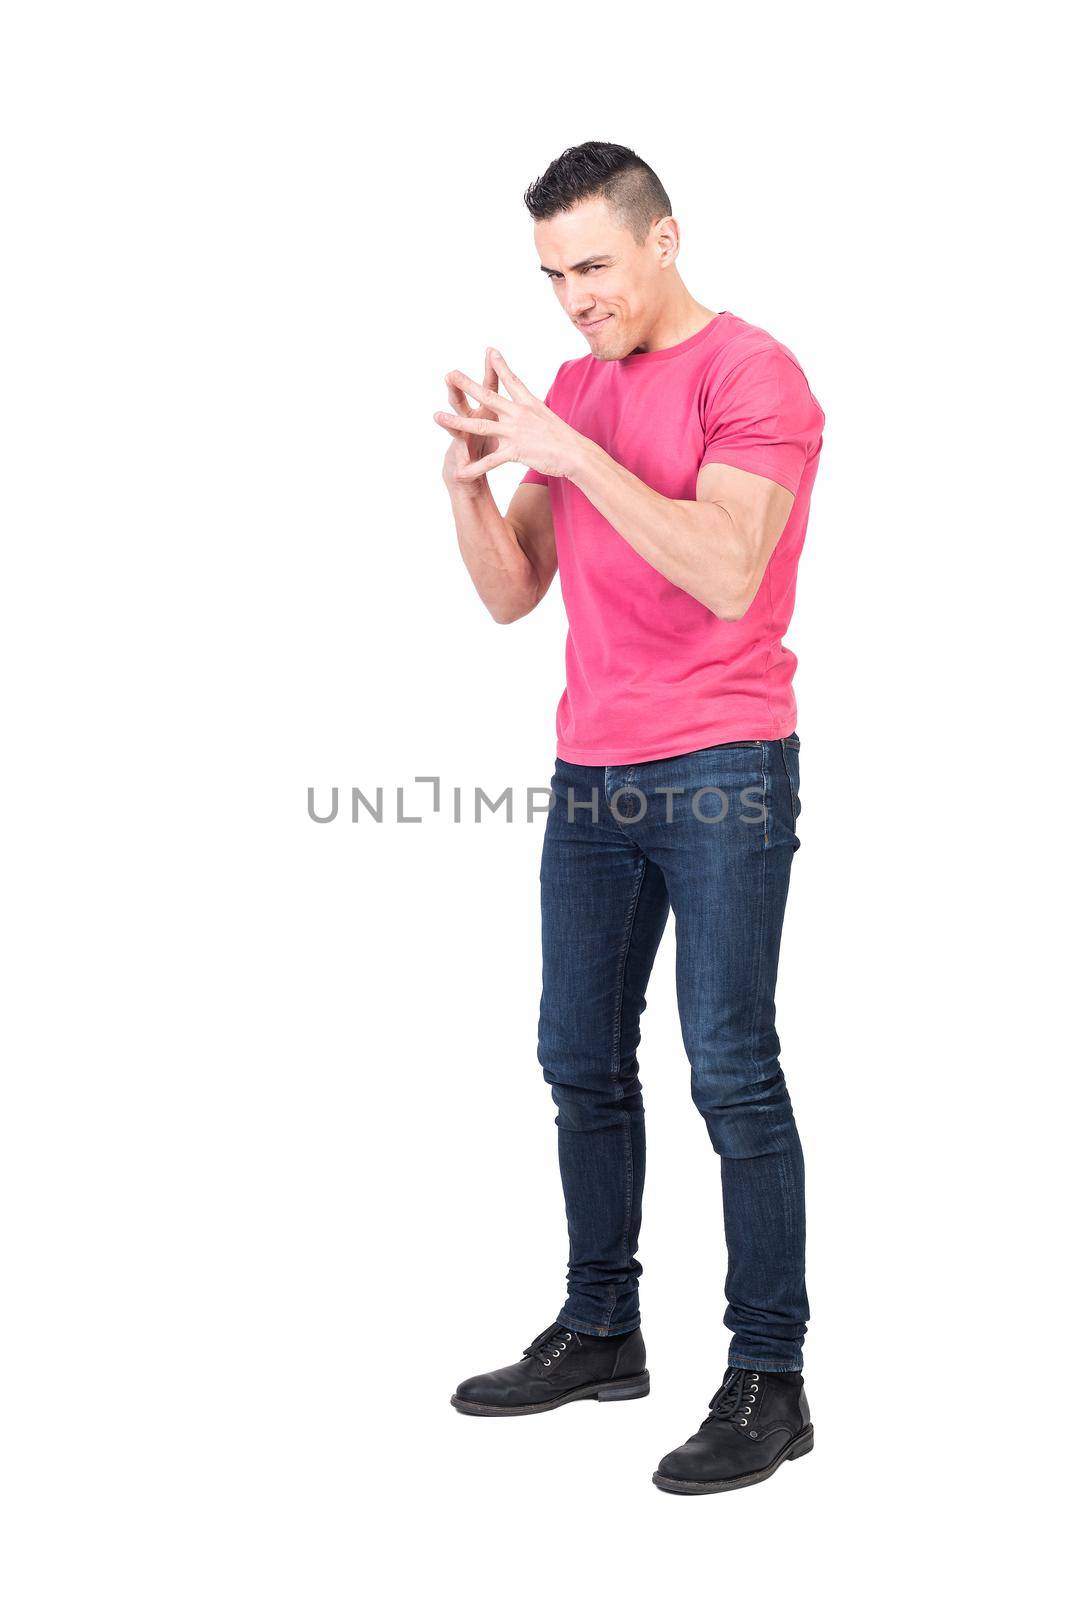 Full length of cunning young man with dark hair in t shirt and jeans connecting fingers and looking at camera against white background